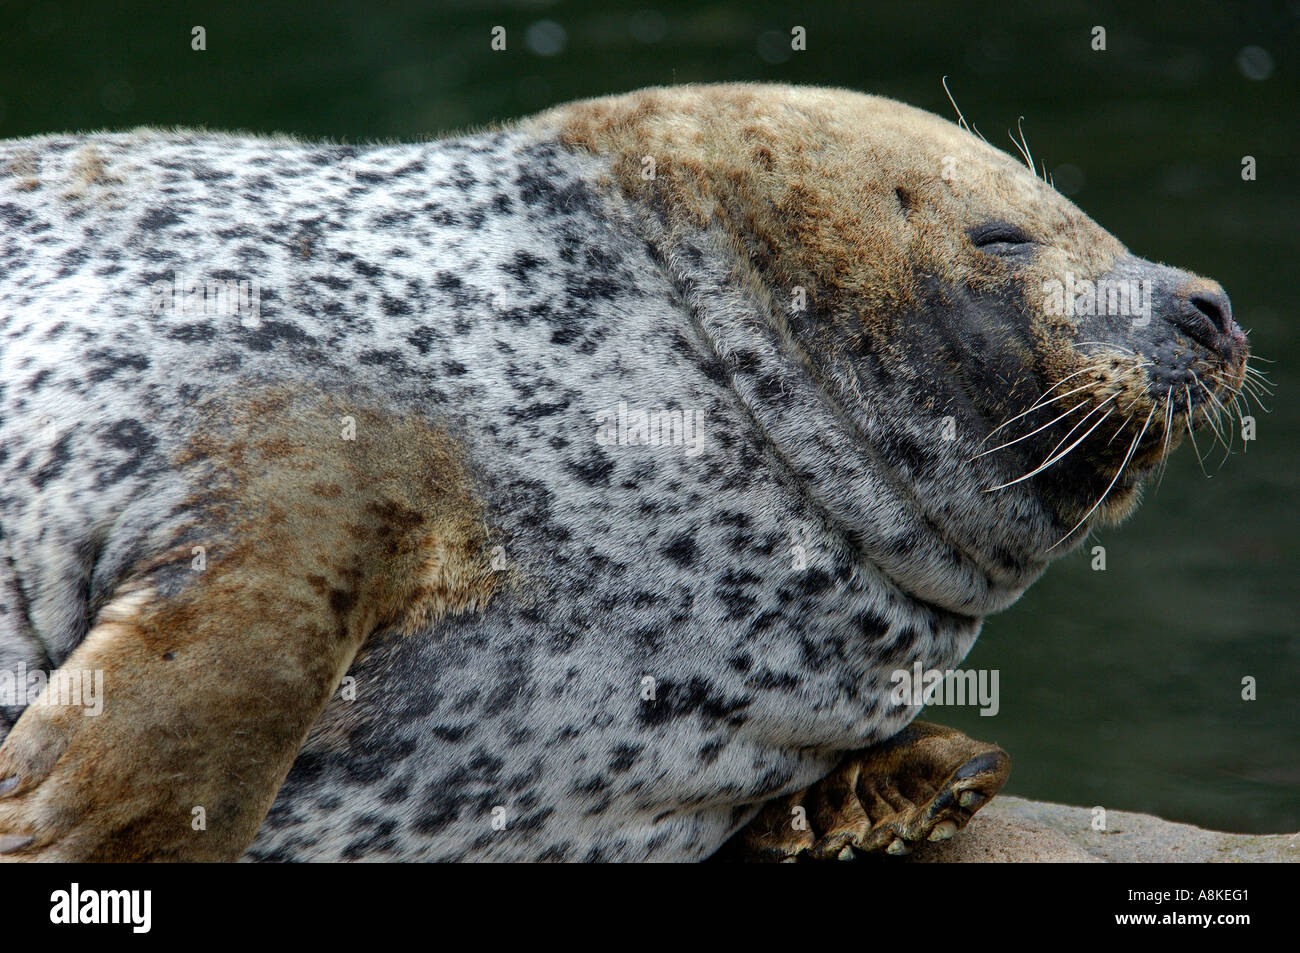 Close up head and shoulders portrait of a Grey Seal or Atlantic seal Halichoerus grypus leaning back with eyes closed looking co Stock Photo